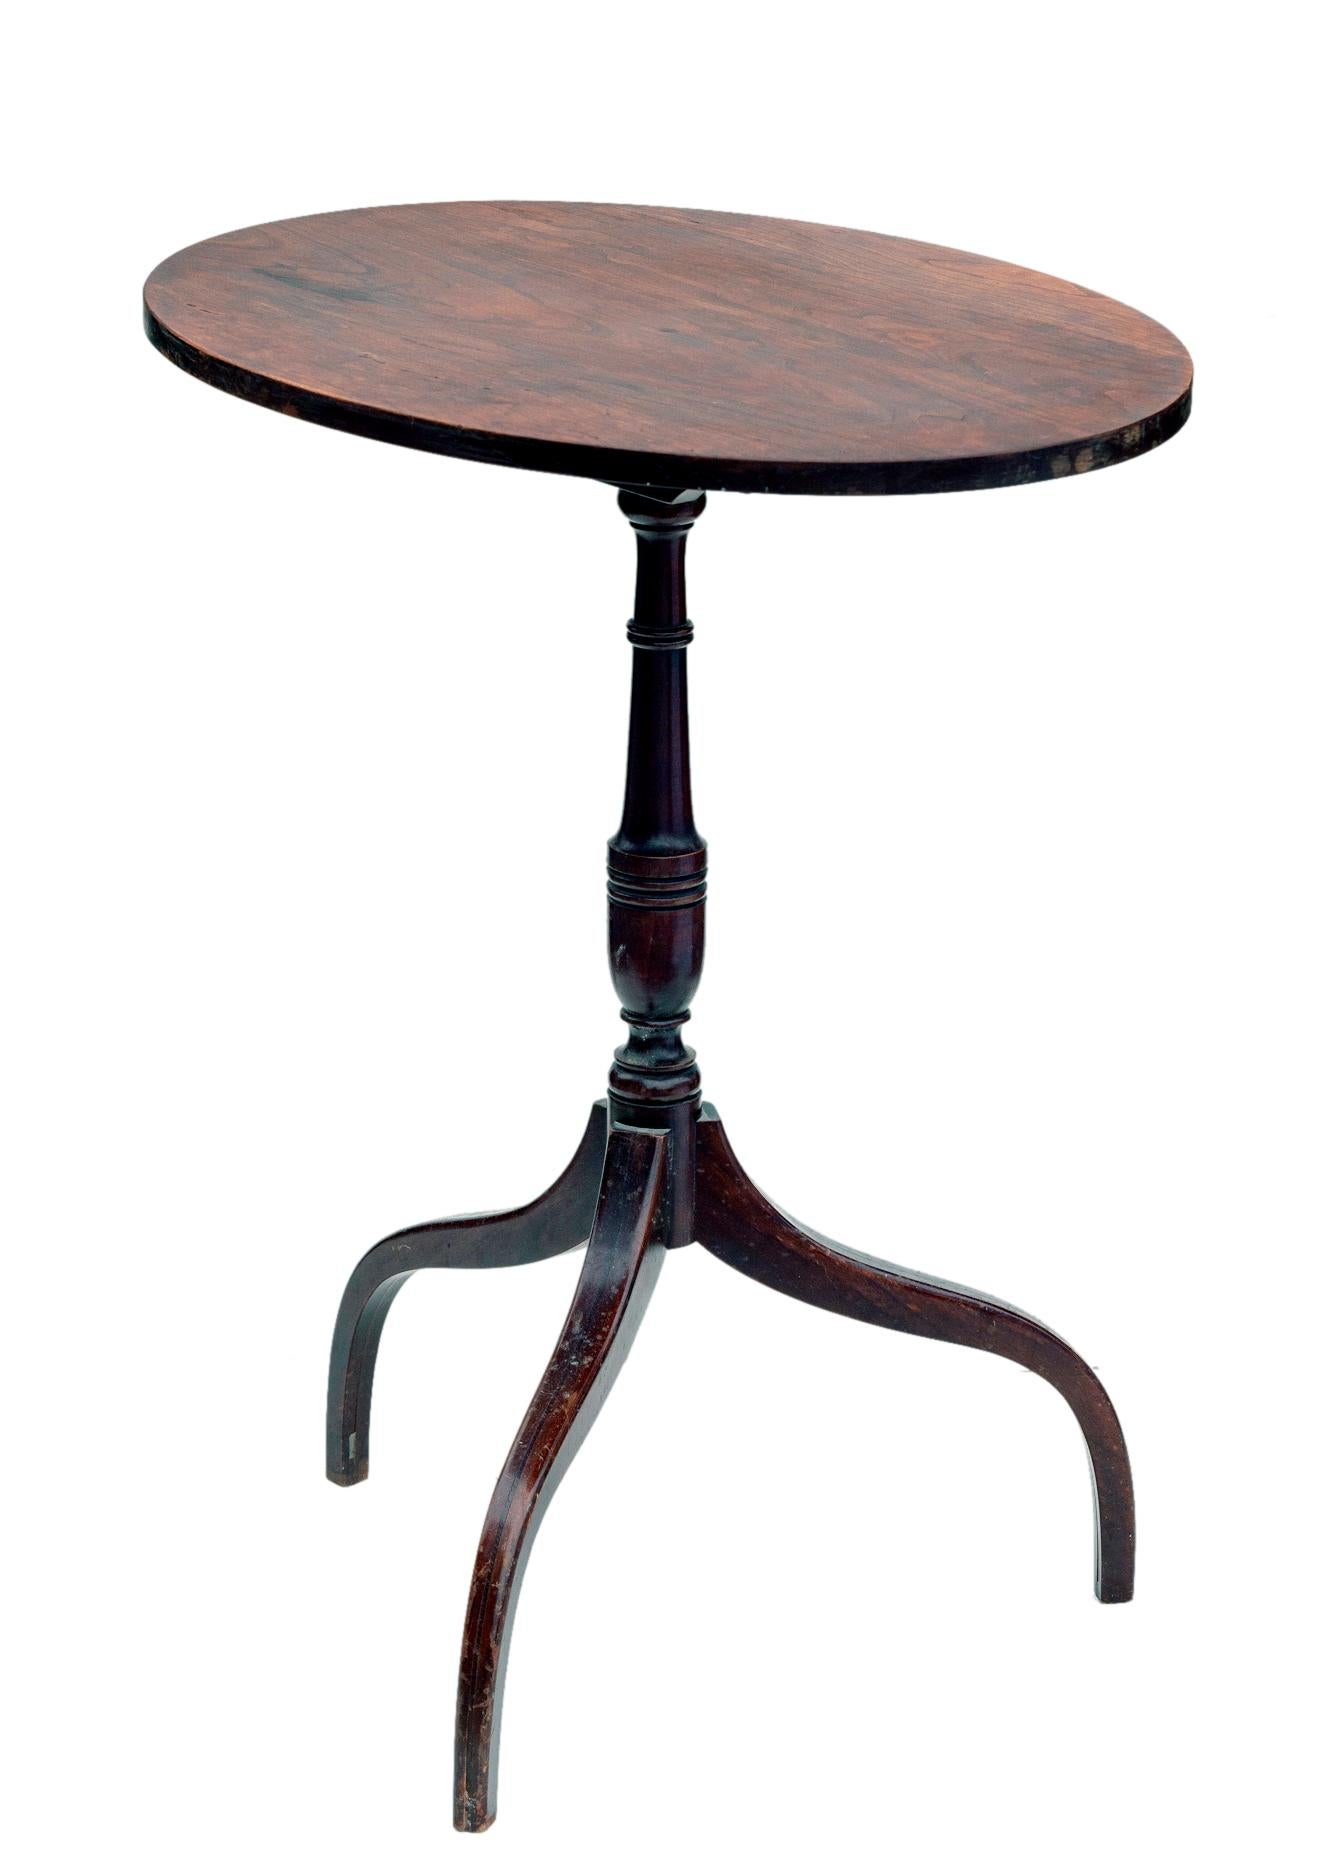 American Antique Cherry Oval Lilt Top Table For Sale